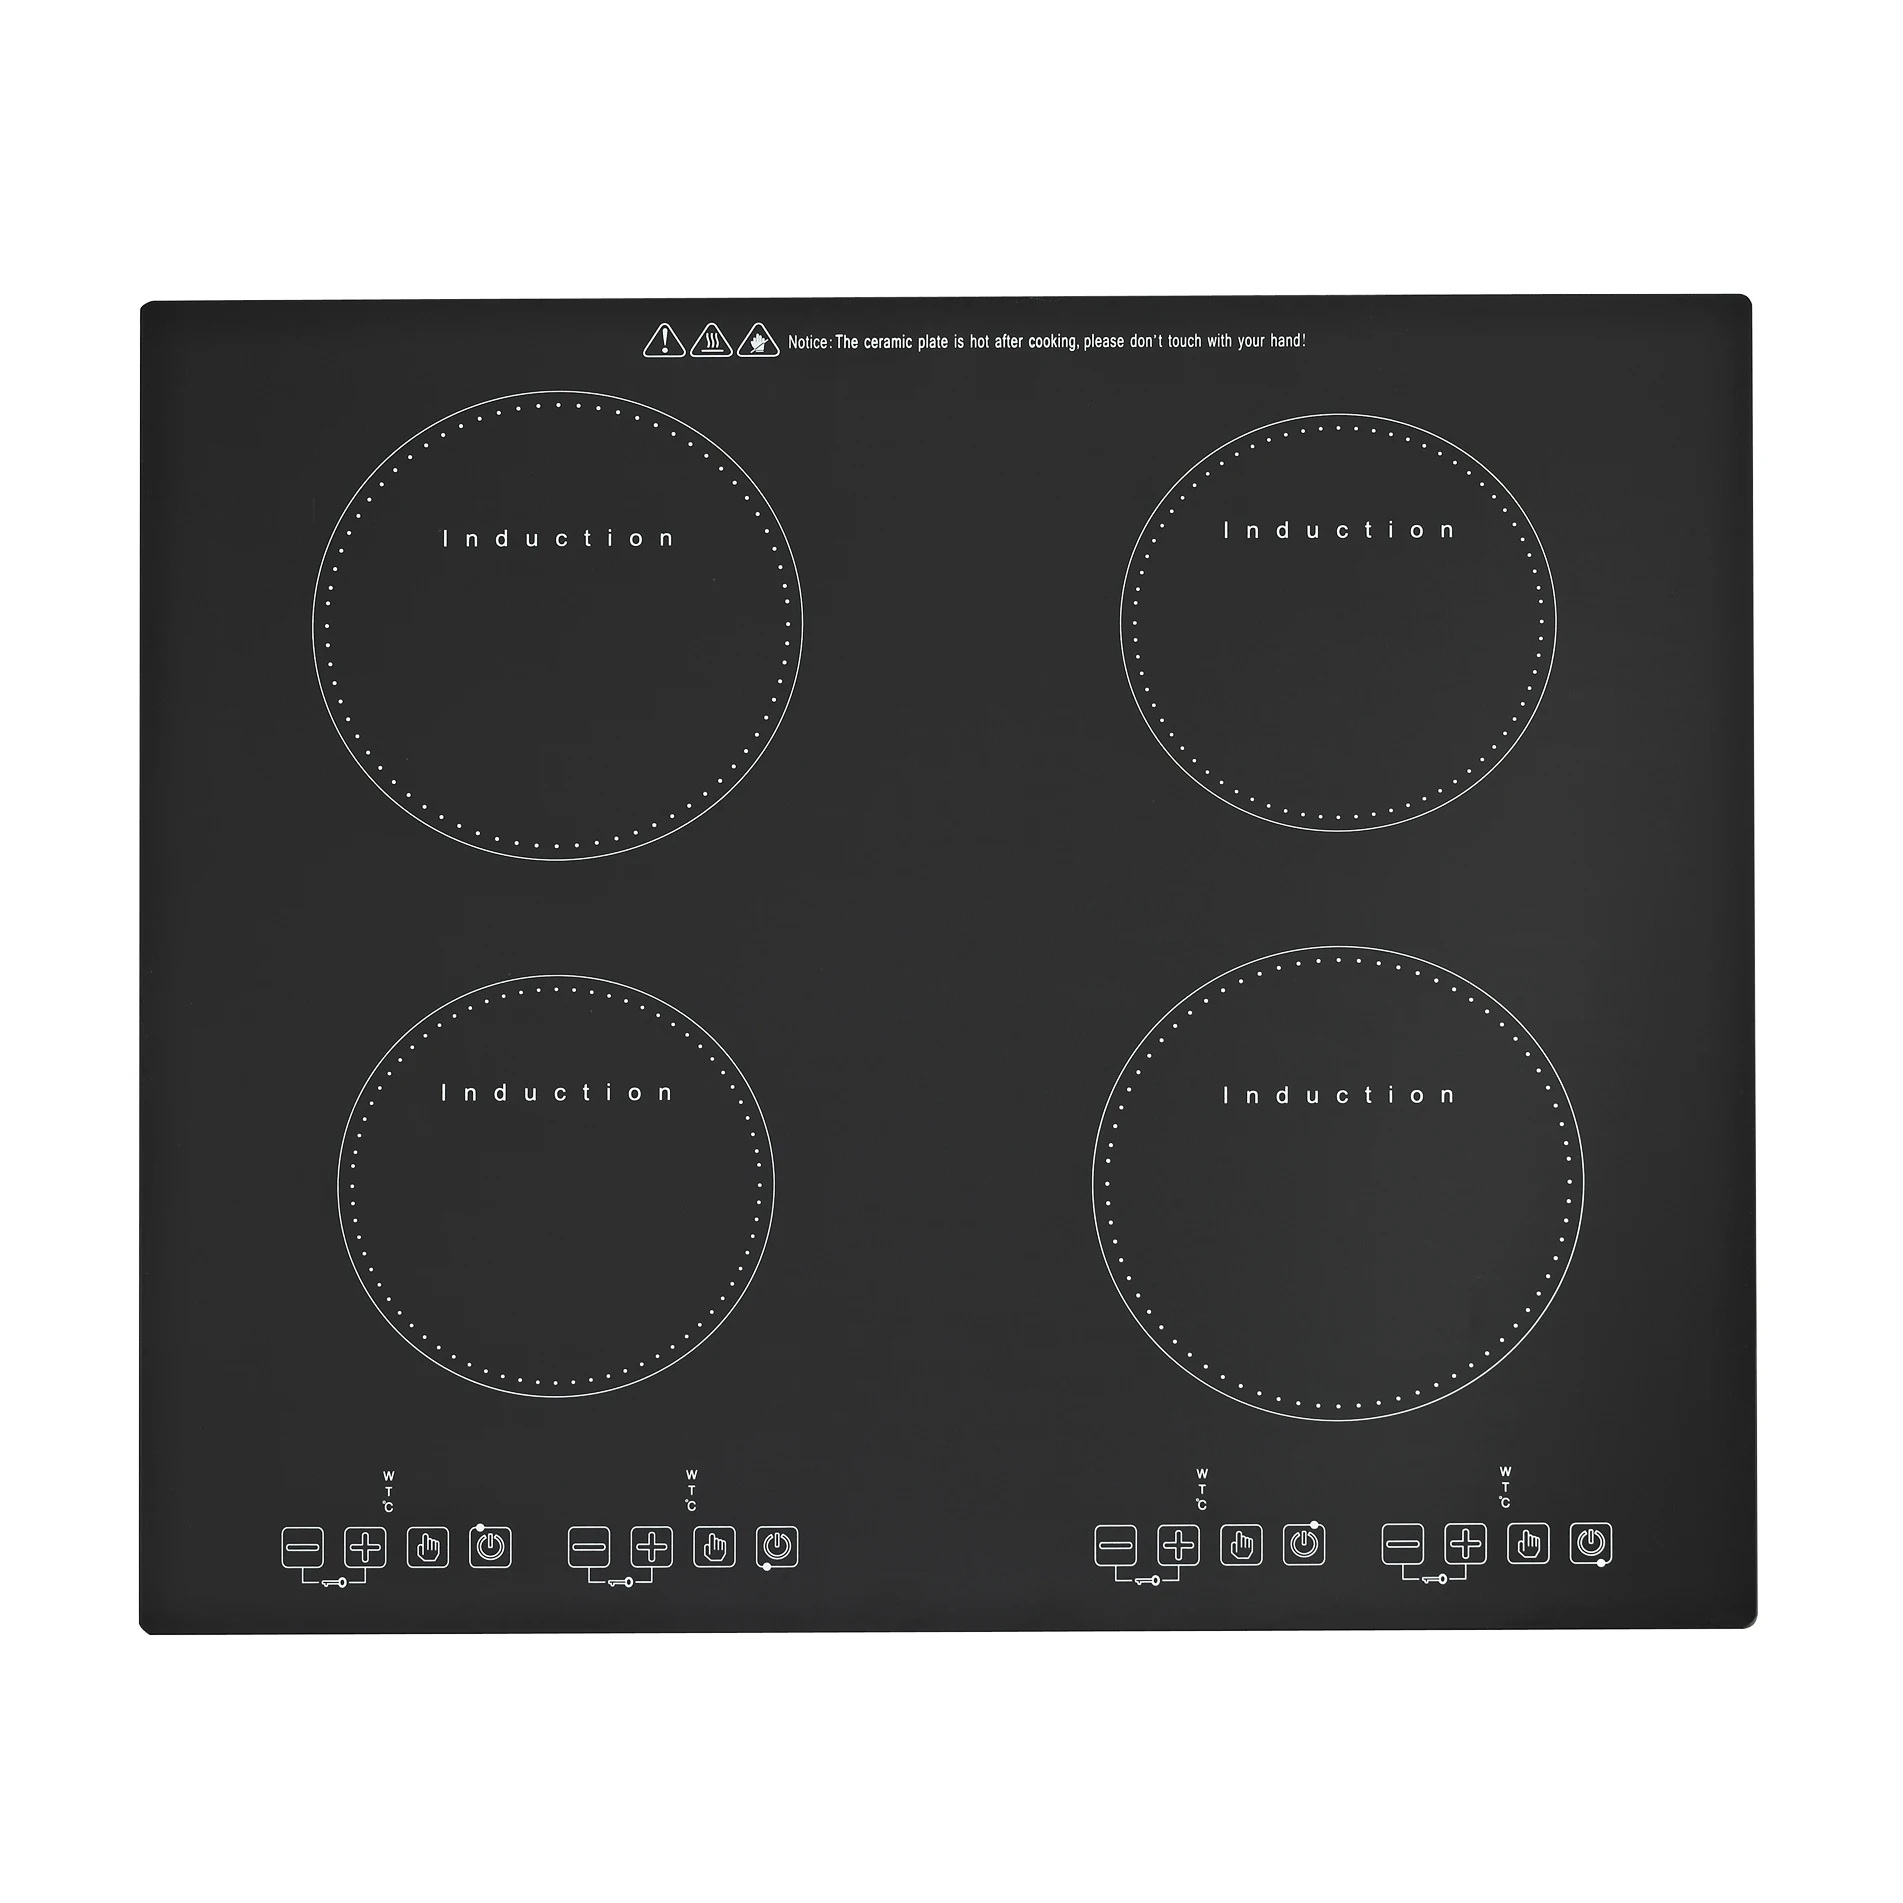 4 hob electric cooker